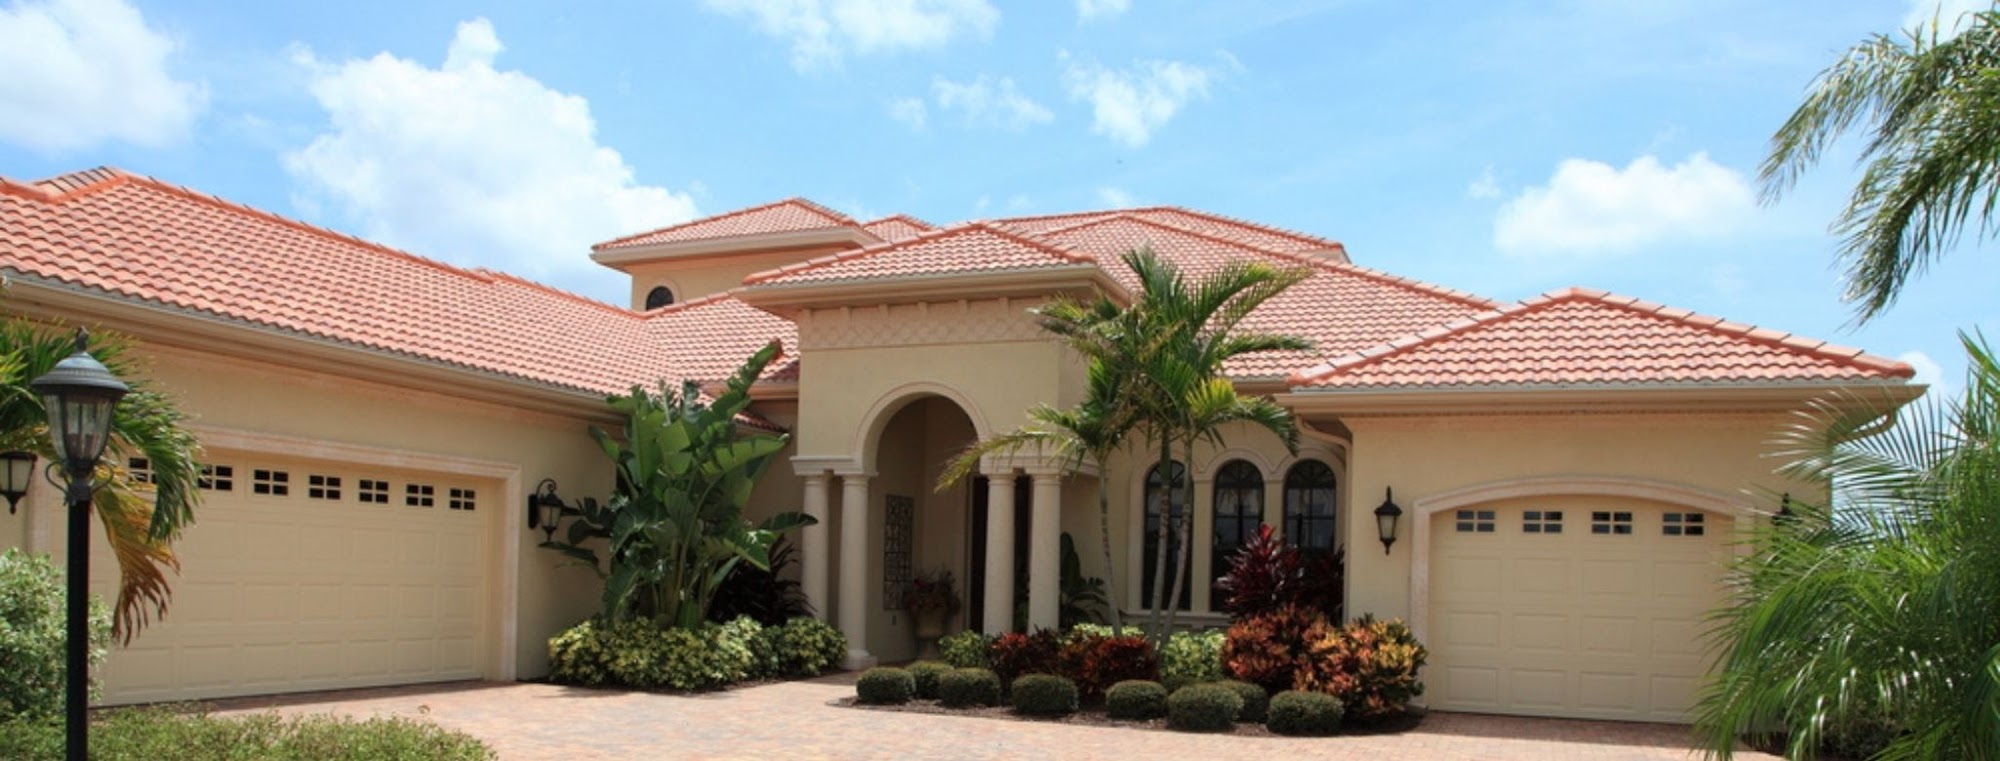 Florida State Roofing Services